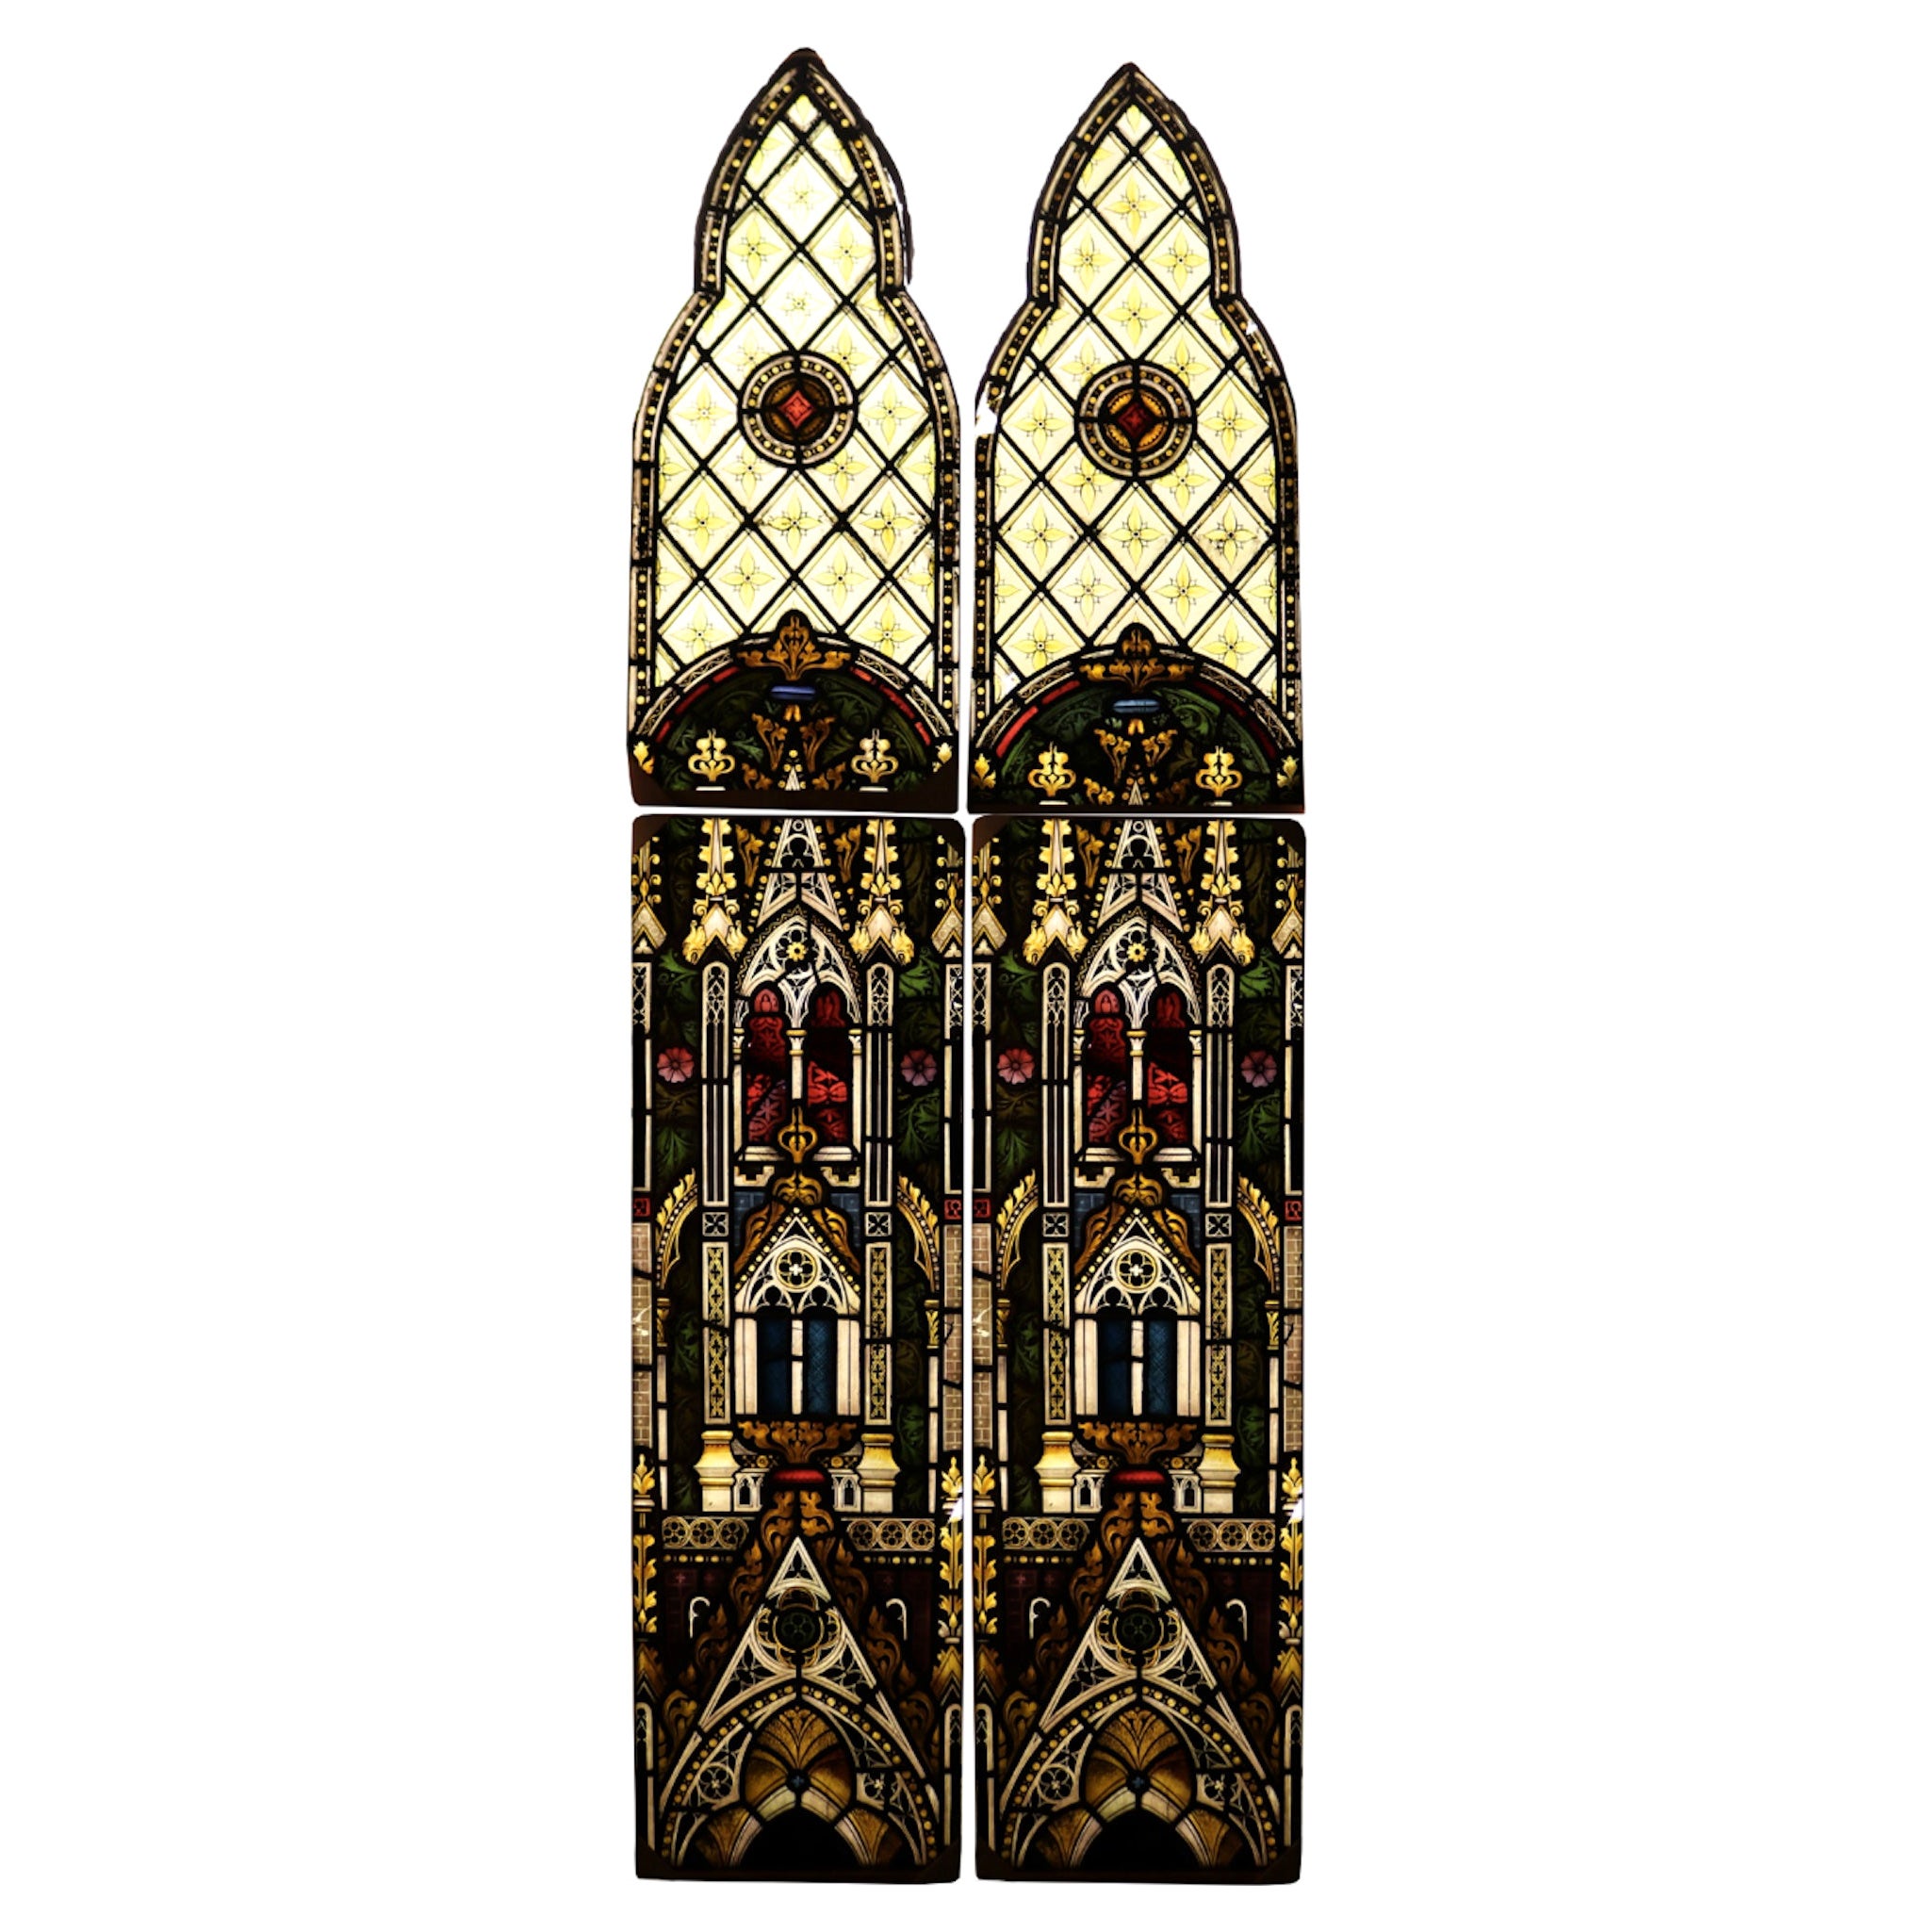 English Antique Stained Glass Windows